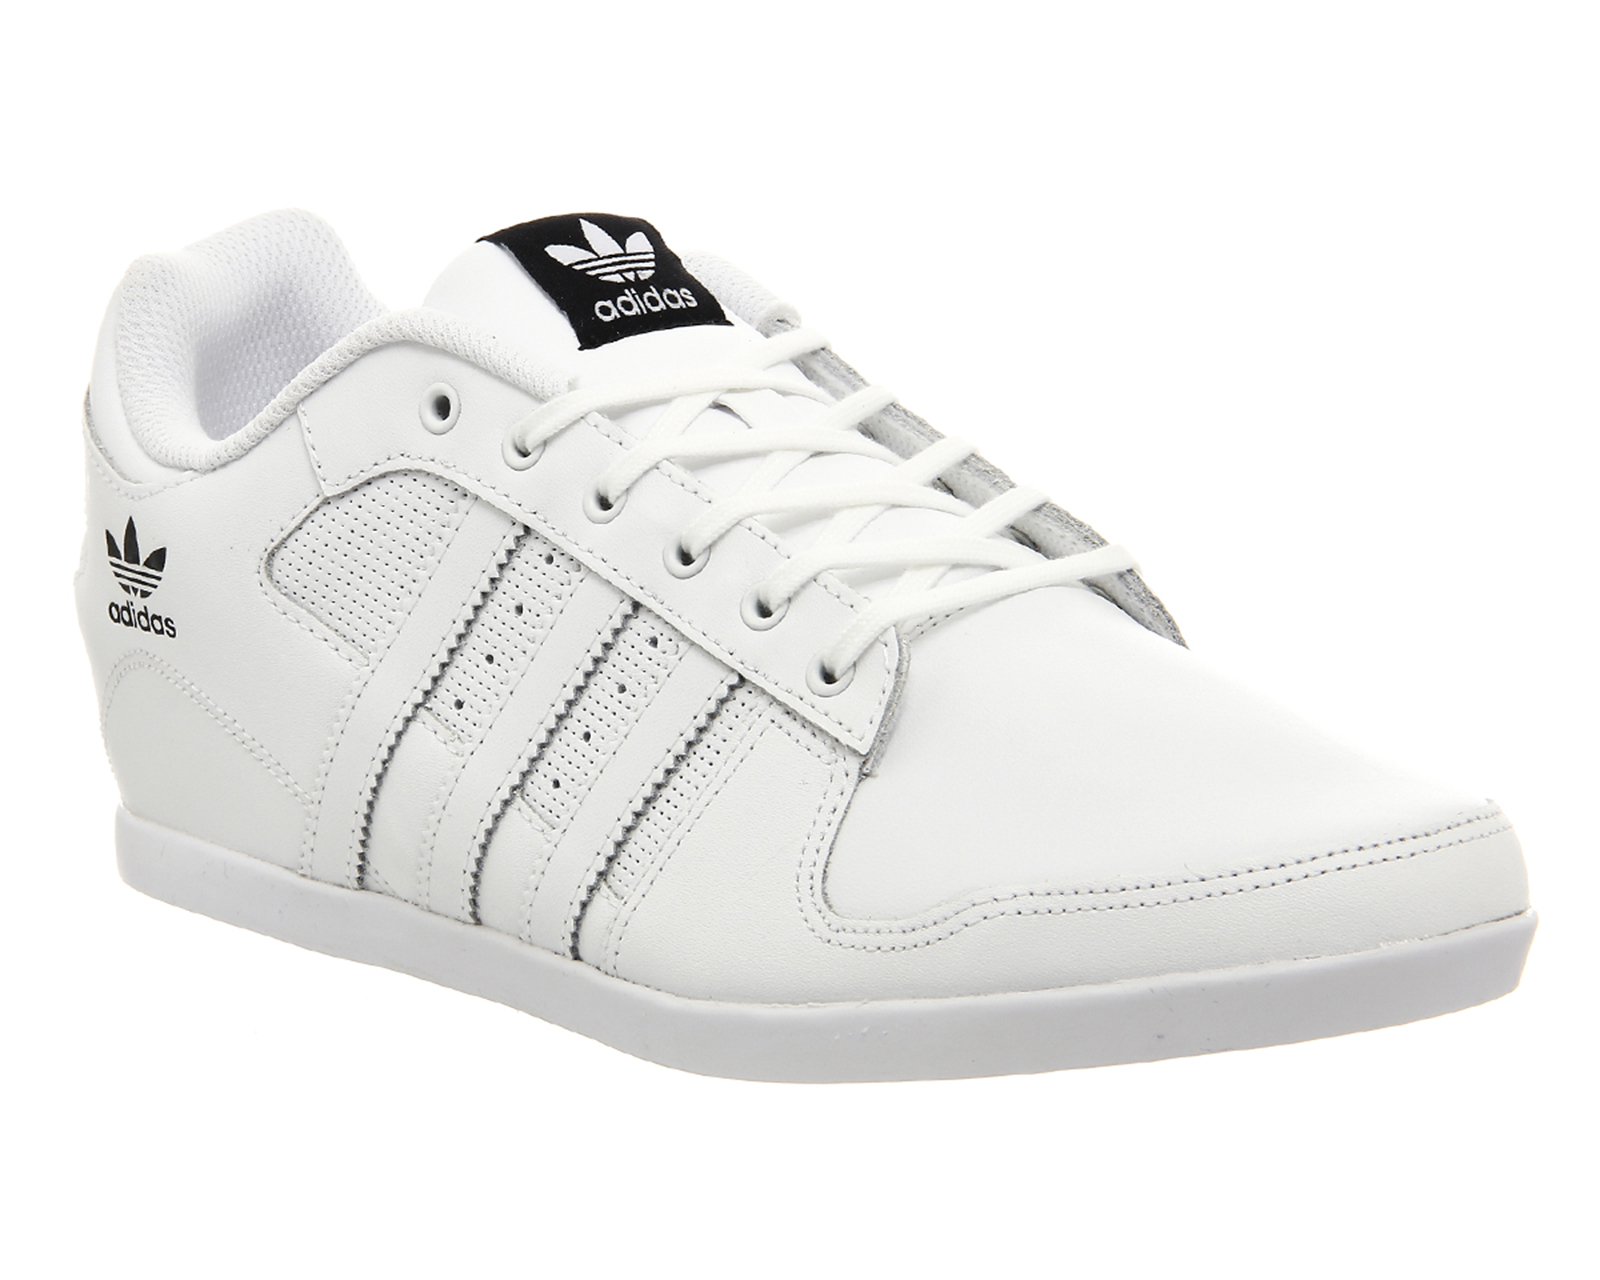 adidas Plimcana 2.0 Low White - His trainers